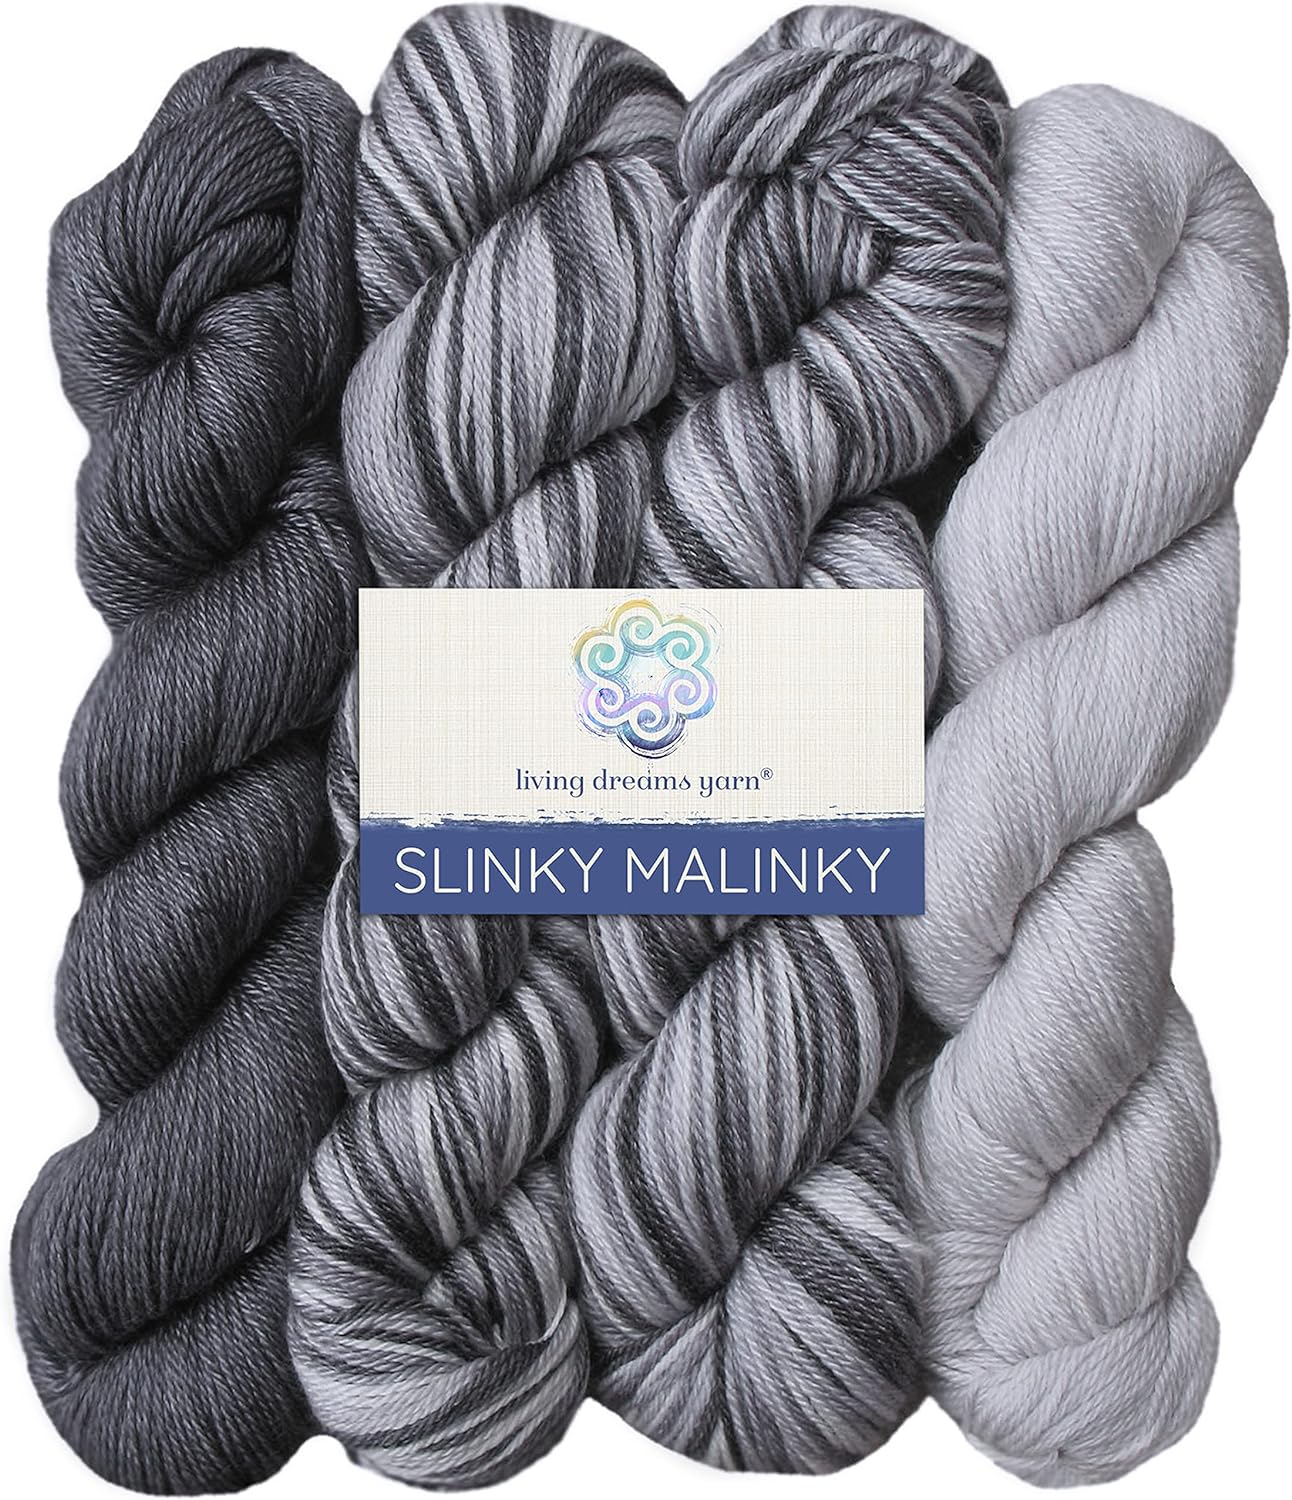 Slinky Malinky Superwash Merino Sock Yarn with Tencel - Silky &#x26; Strong. Pacific Northwest Hand Dyed. Fingering Weight #1.